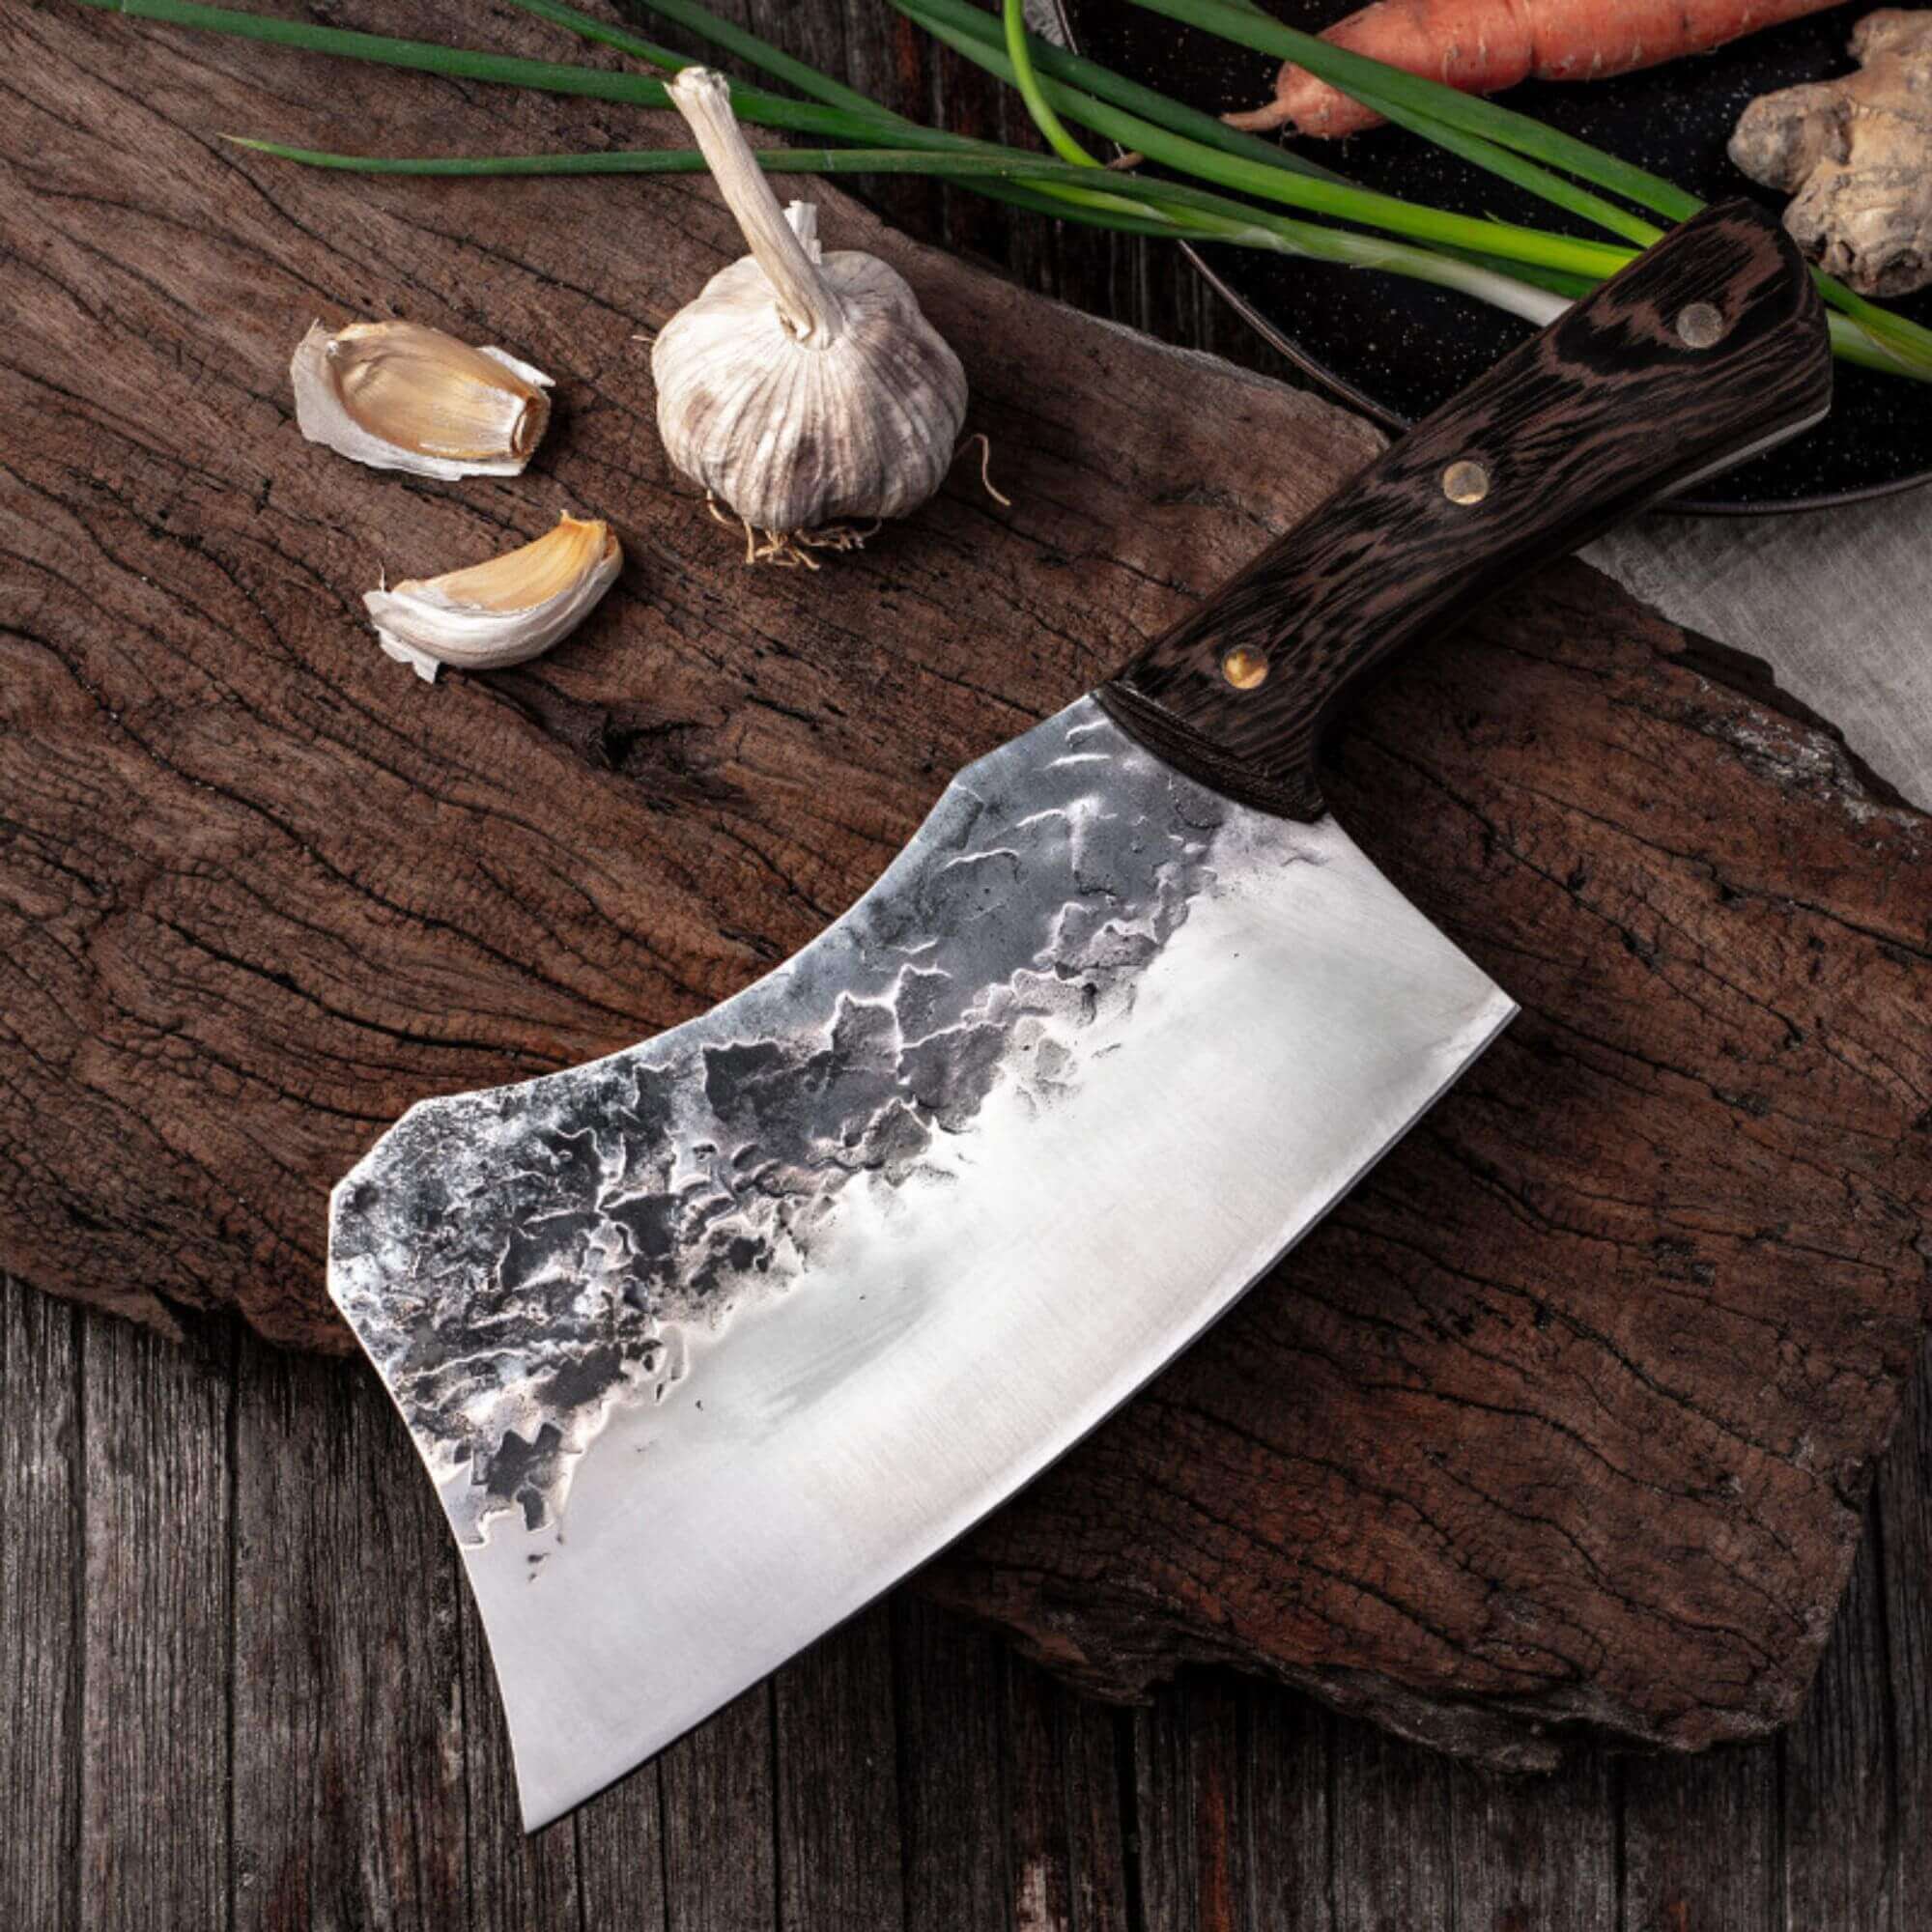 Cleaver Chopping kitchen Knife